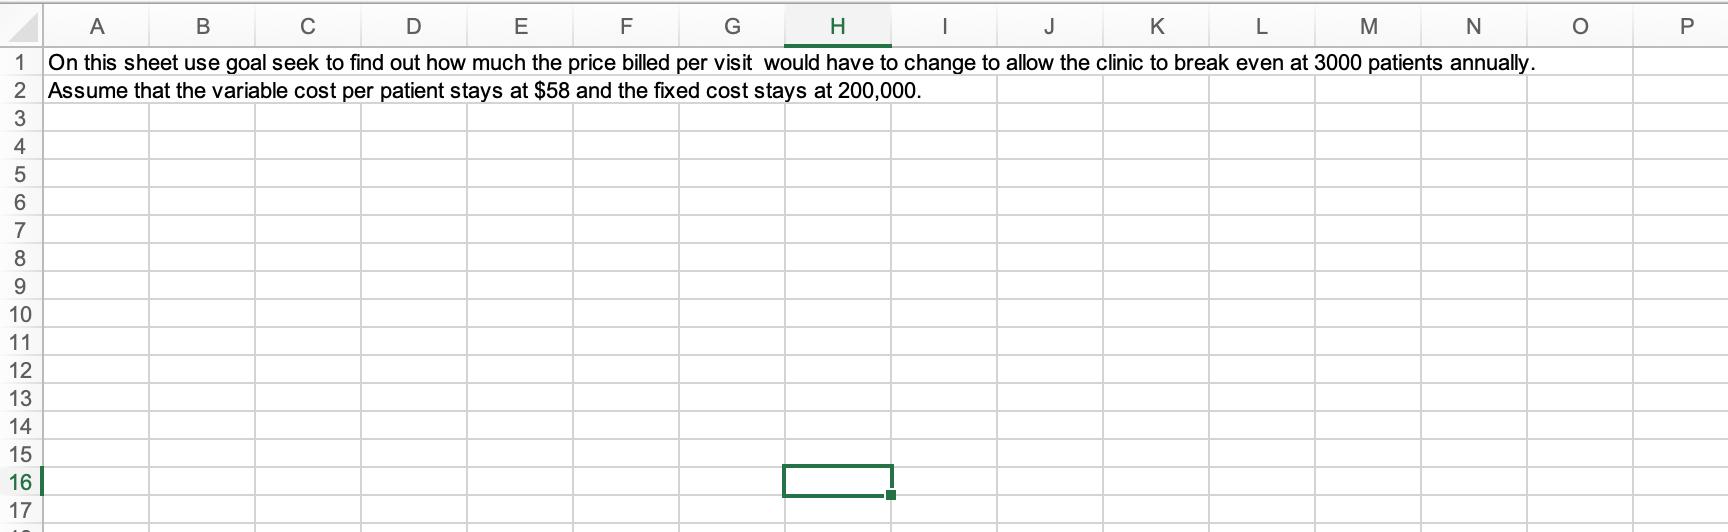 о P A B с D E F G H 1 K L M N 1 On this sheet use goal seek to find out how much the price billed per visit would have to cha